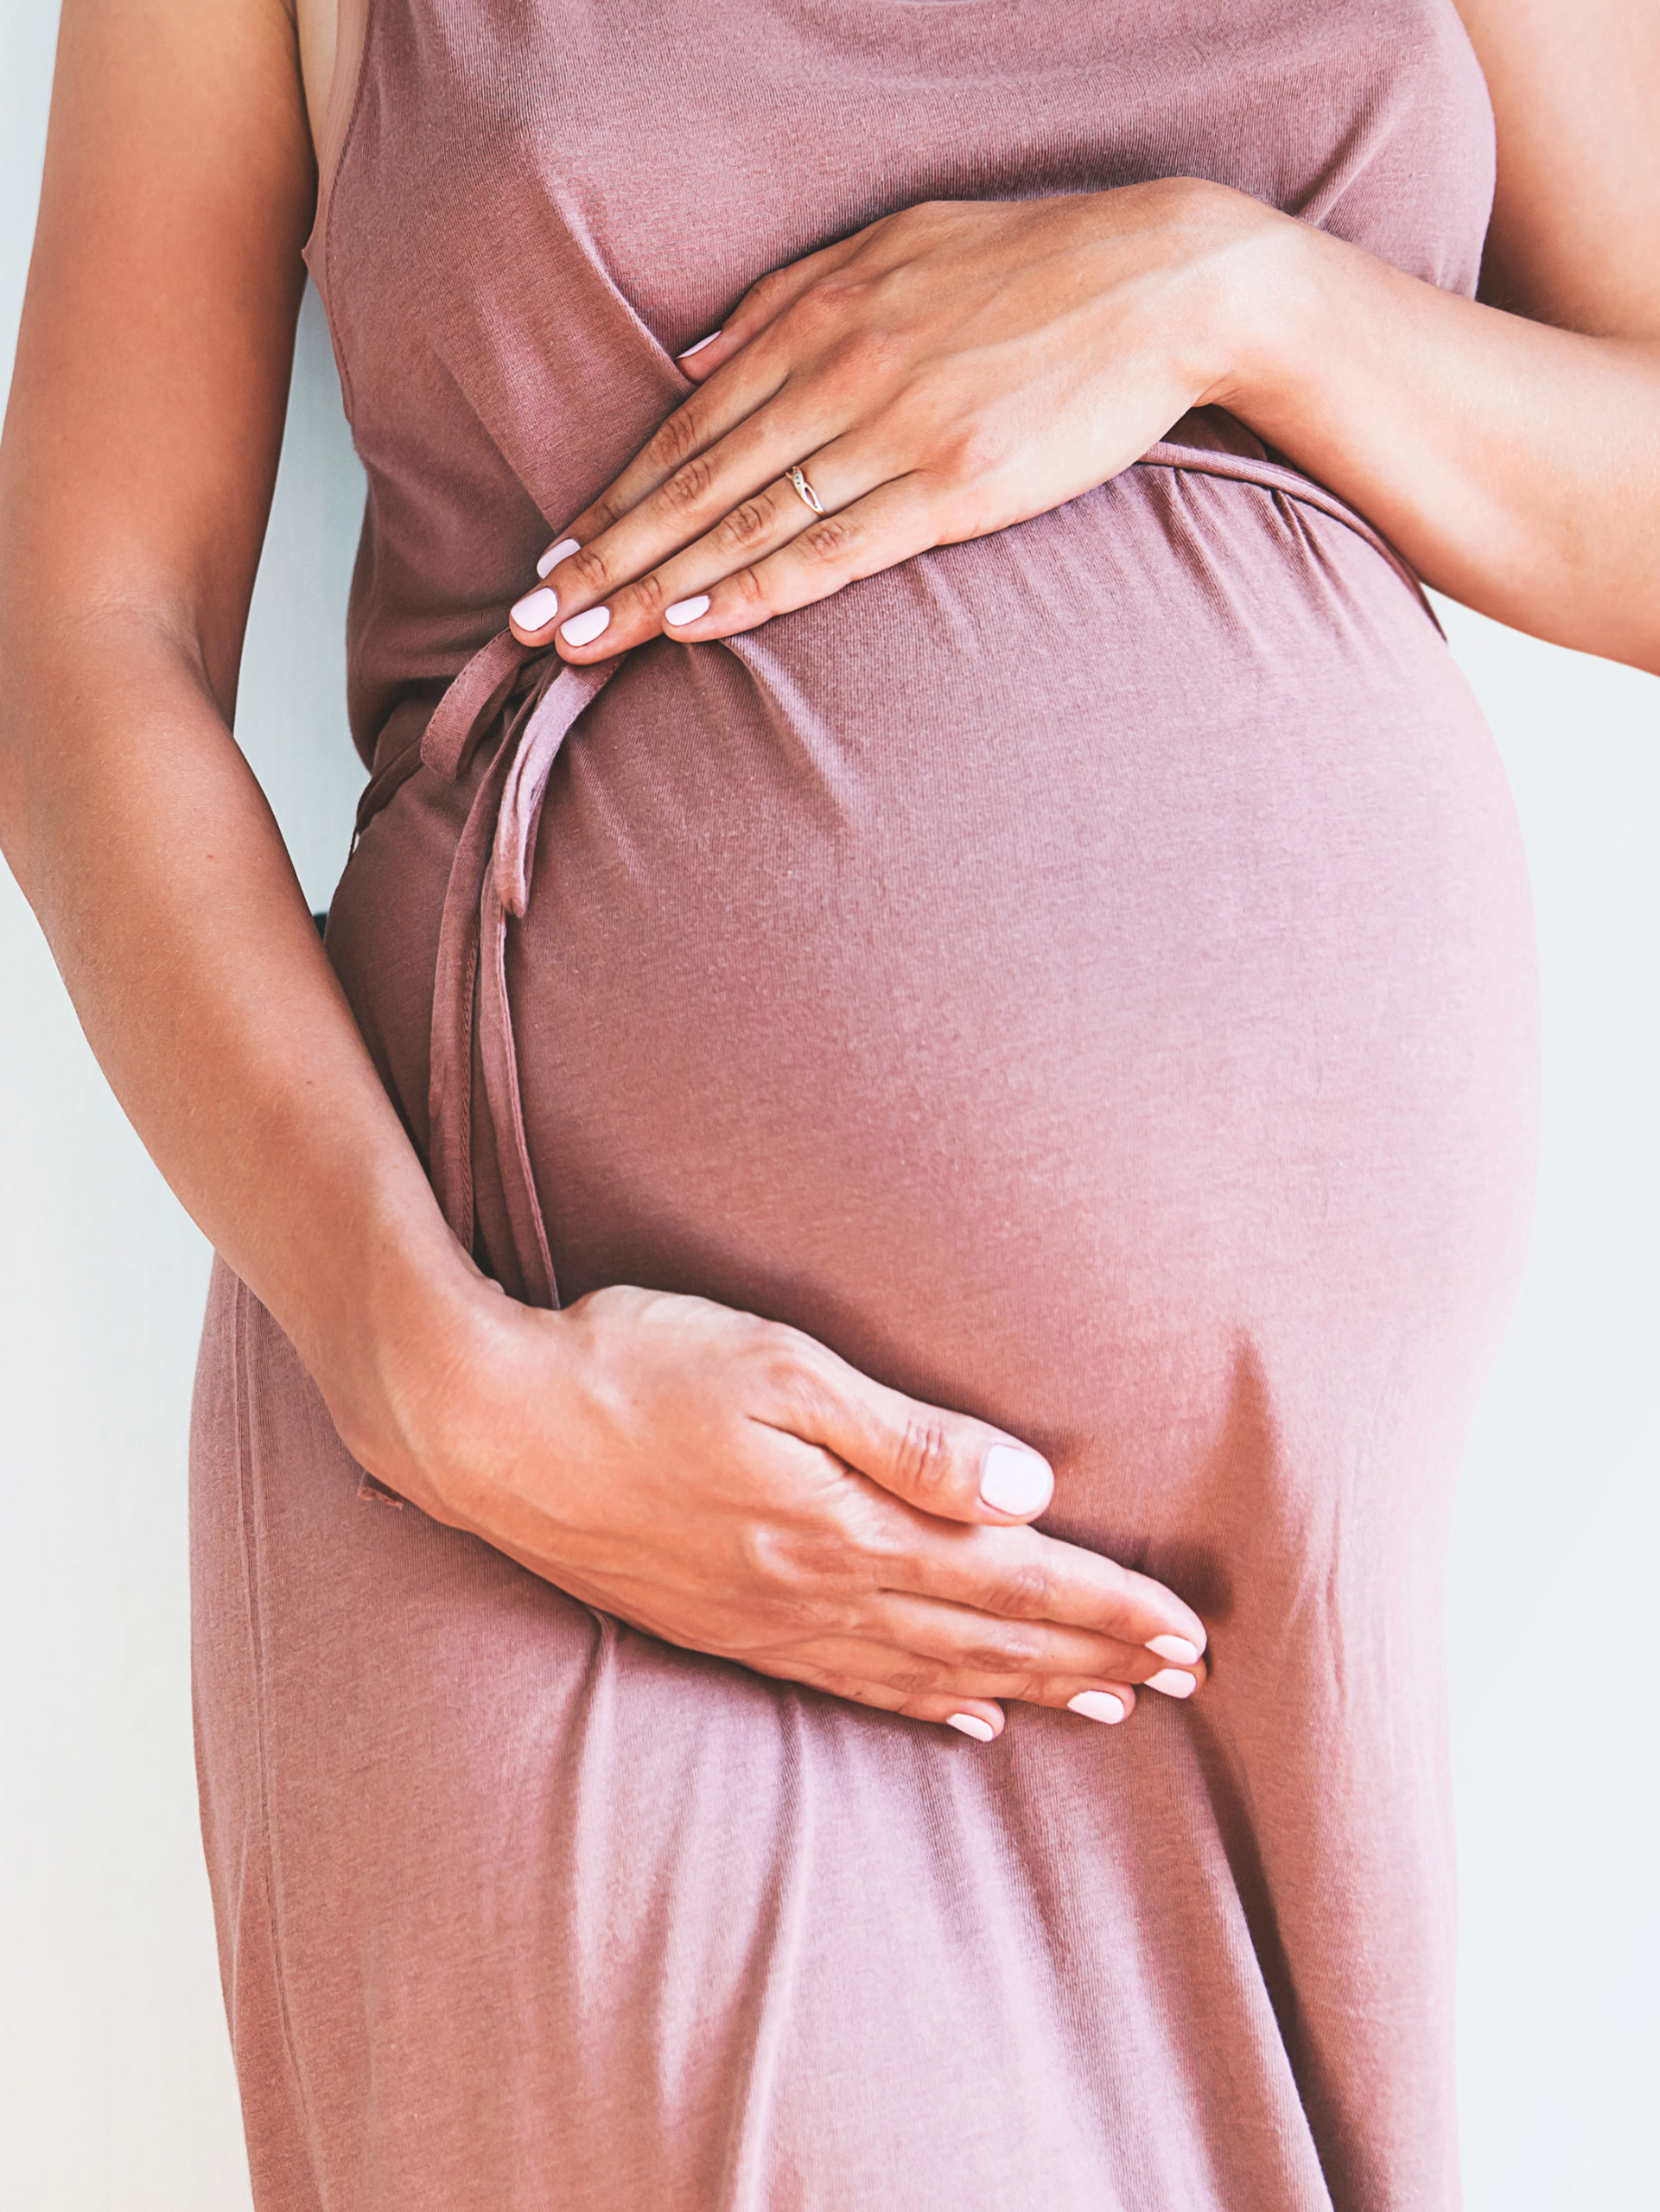 What to do if your baby is given a medical diagnosis during pregnancy